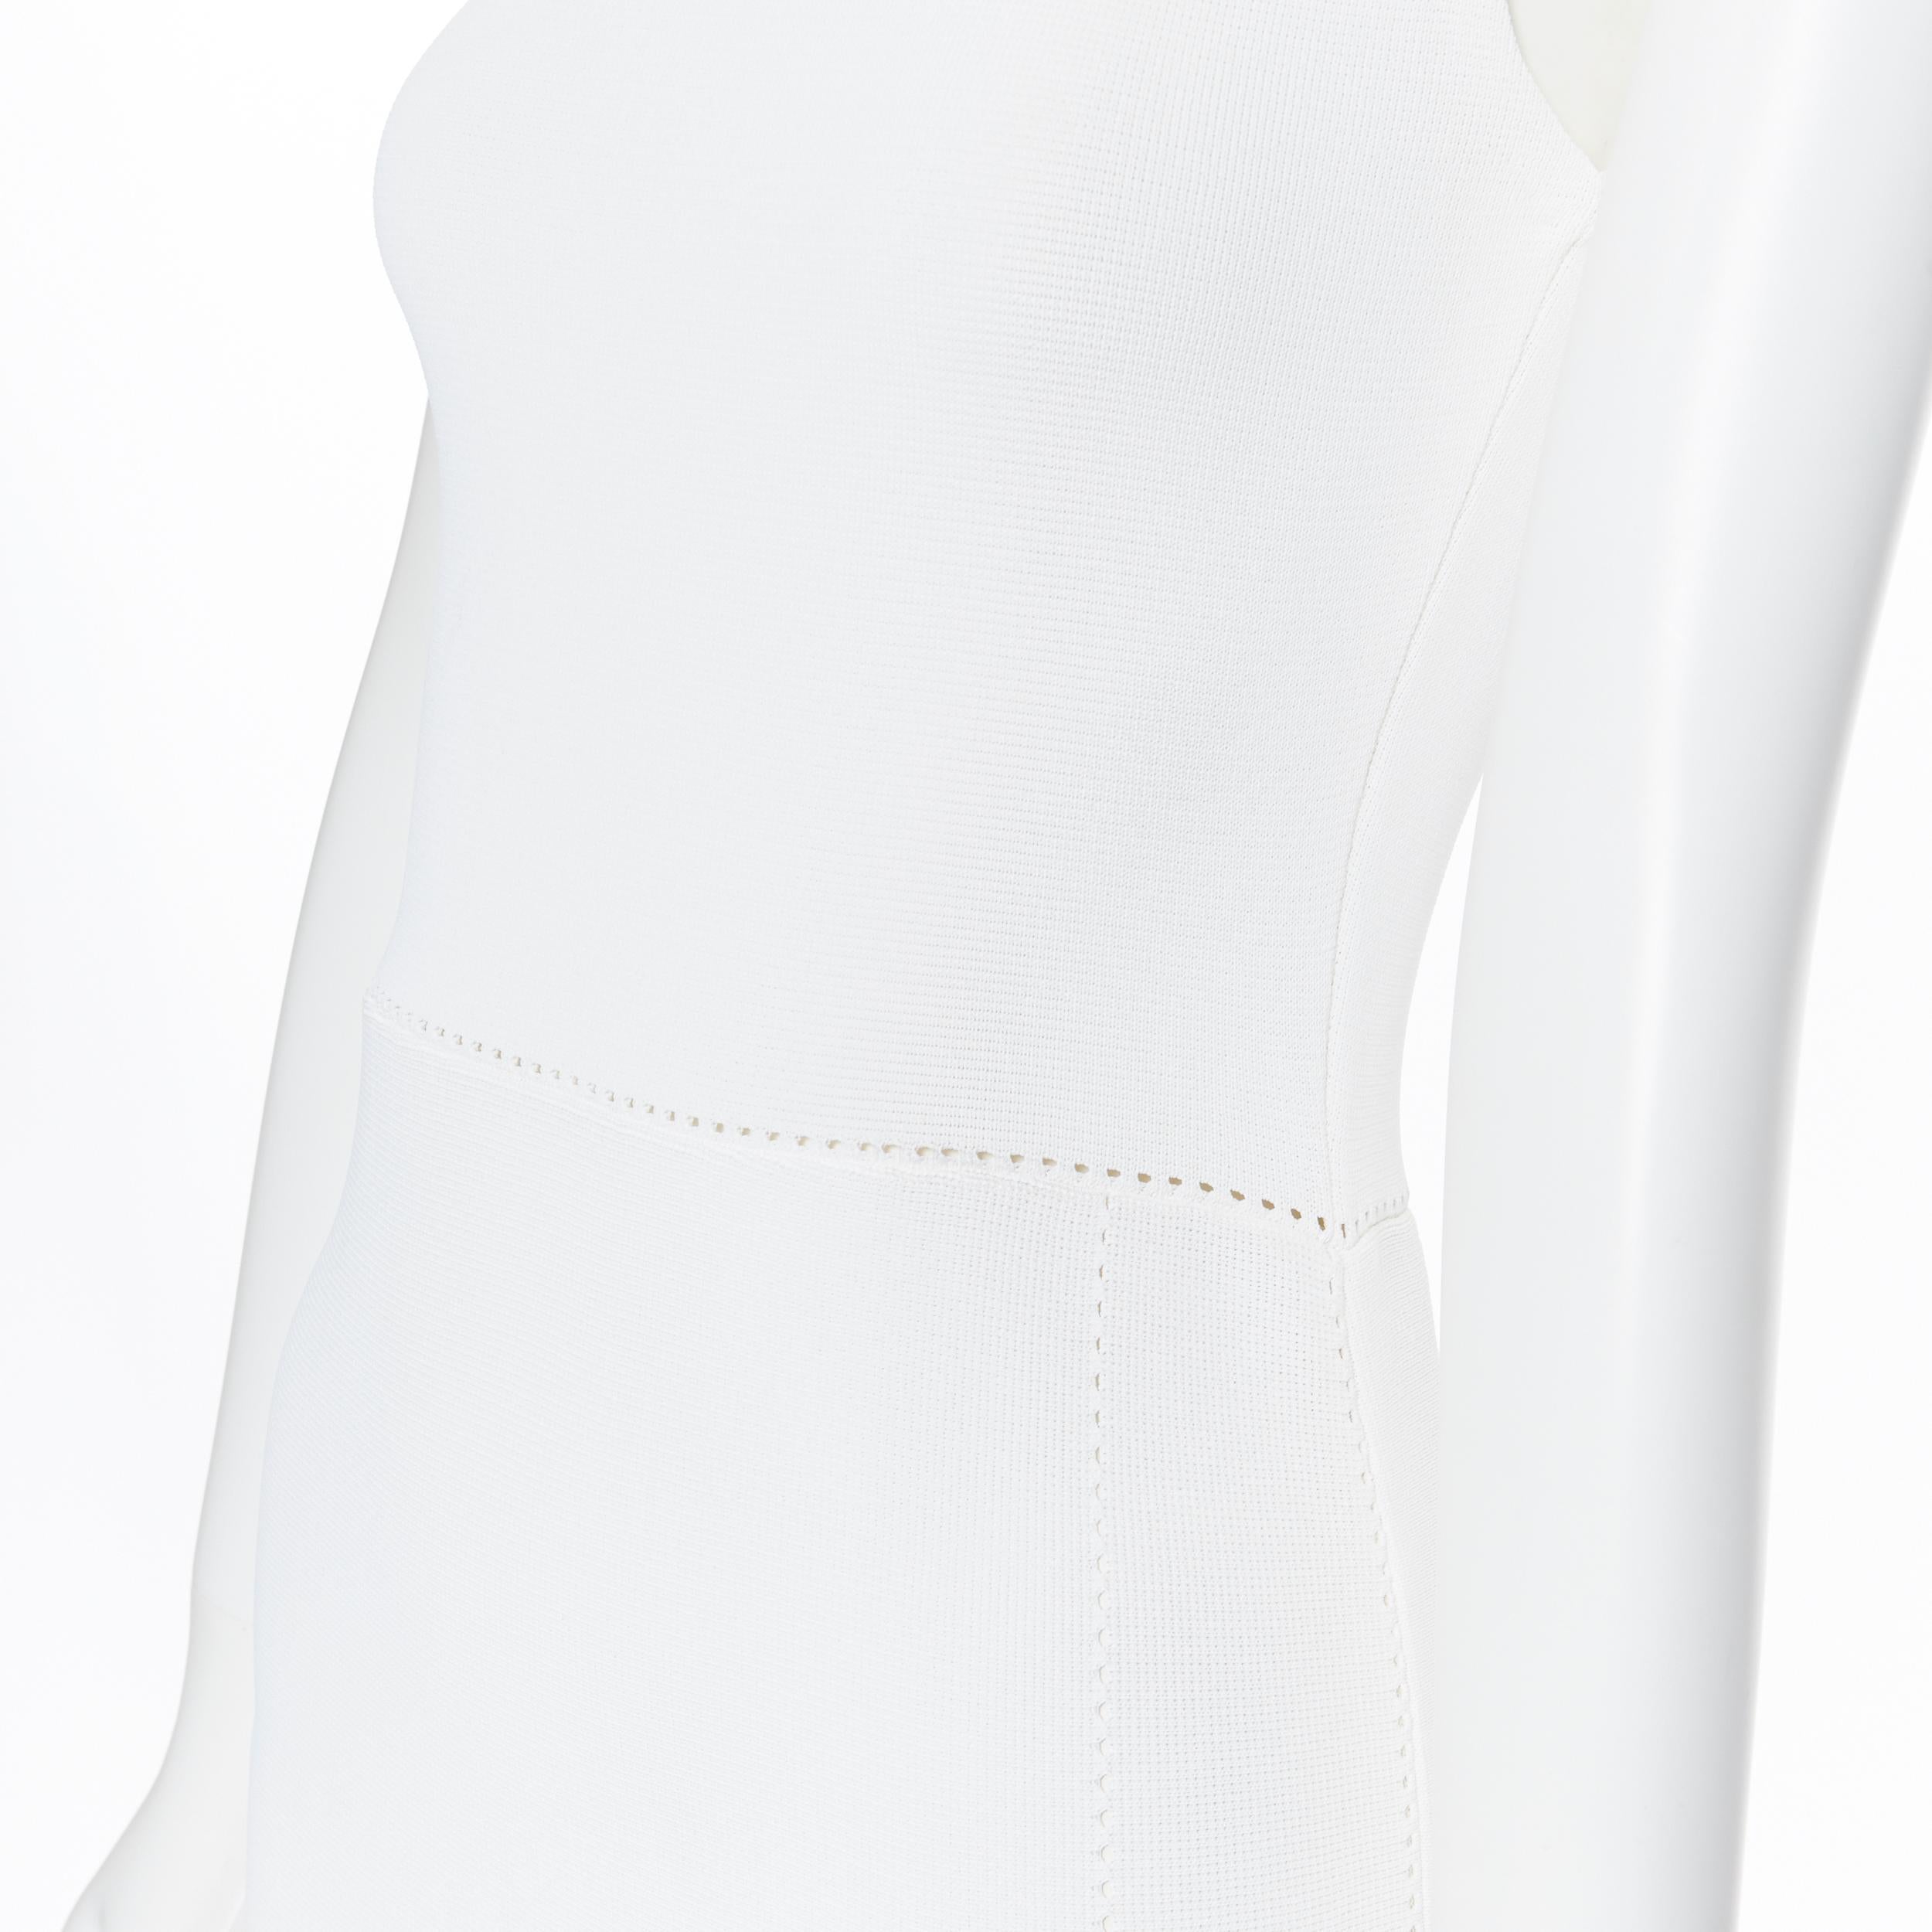 GIADA white viscose knit dotted seams stretch midi work dress IT38
Brand: Giada
Model Name / Style: Knit dress
Material: Viscose blend
Color: White
Pattern: Solid
Closure: Zip
Extra Detail: Open fotted detailing at waist. Sleeveless. Round neck